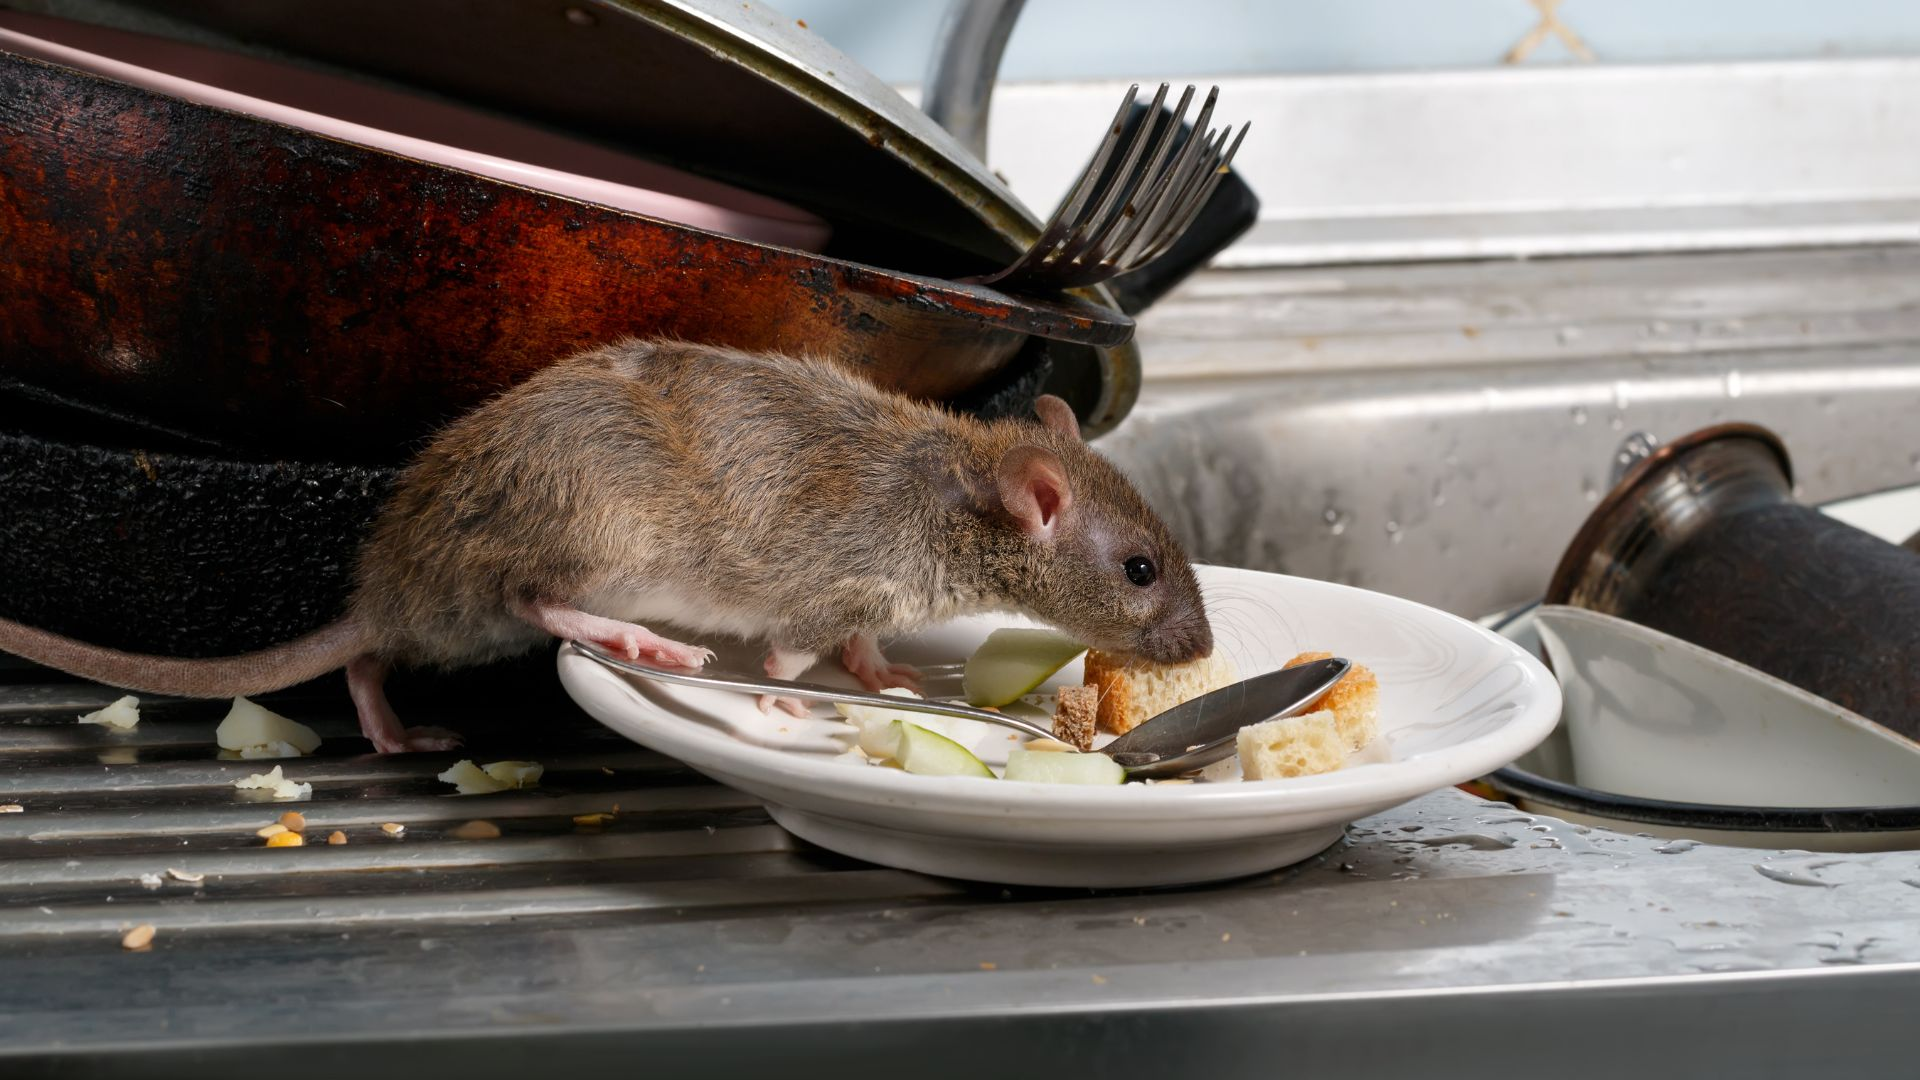 An image of a rat scavenging for food near a sink full of dirty dishes.